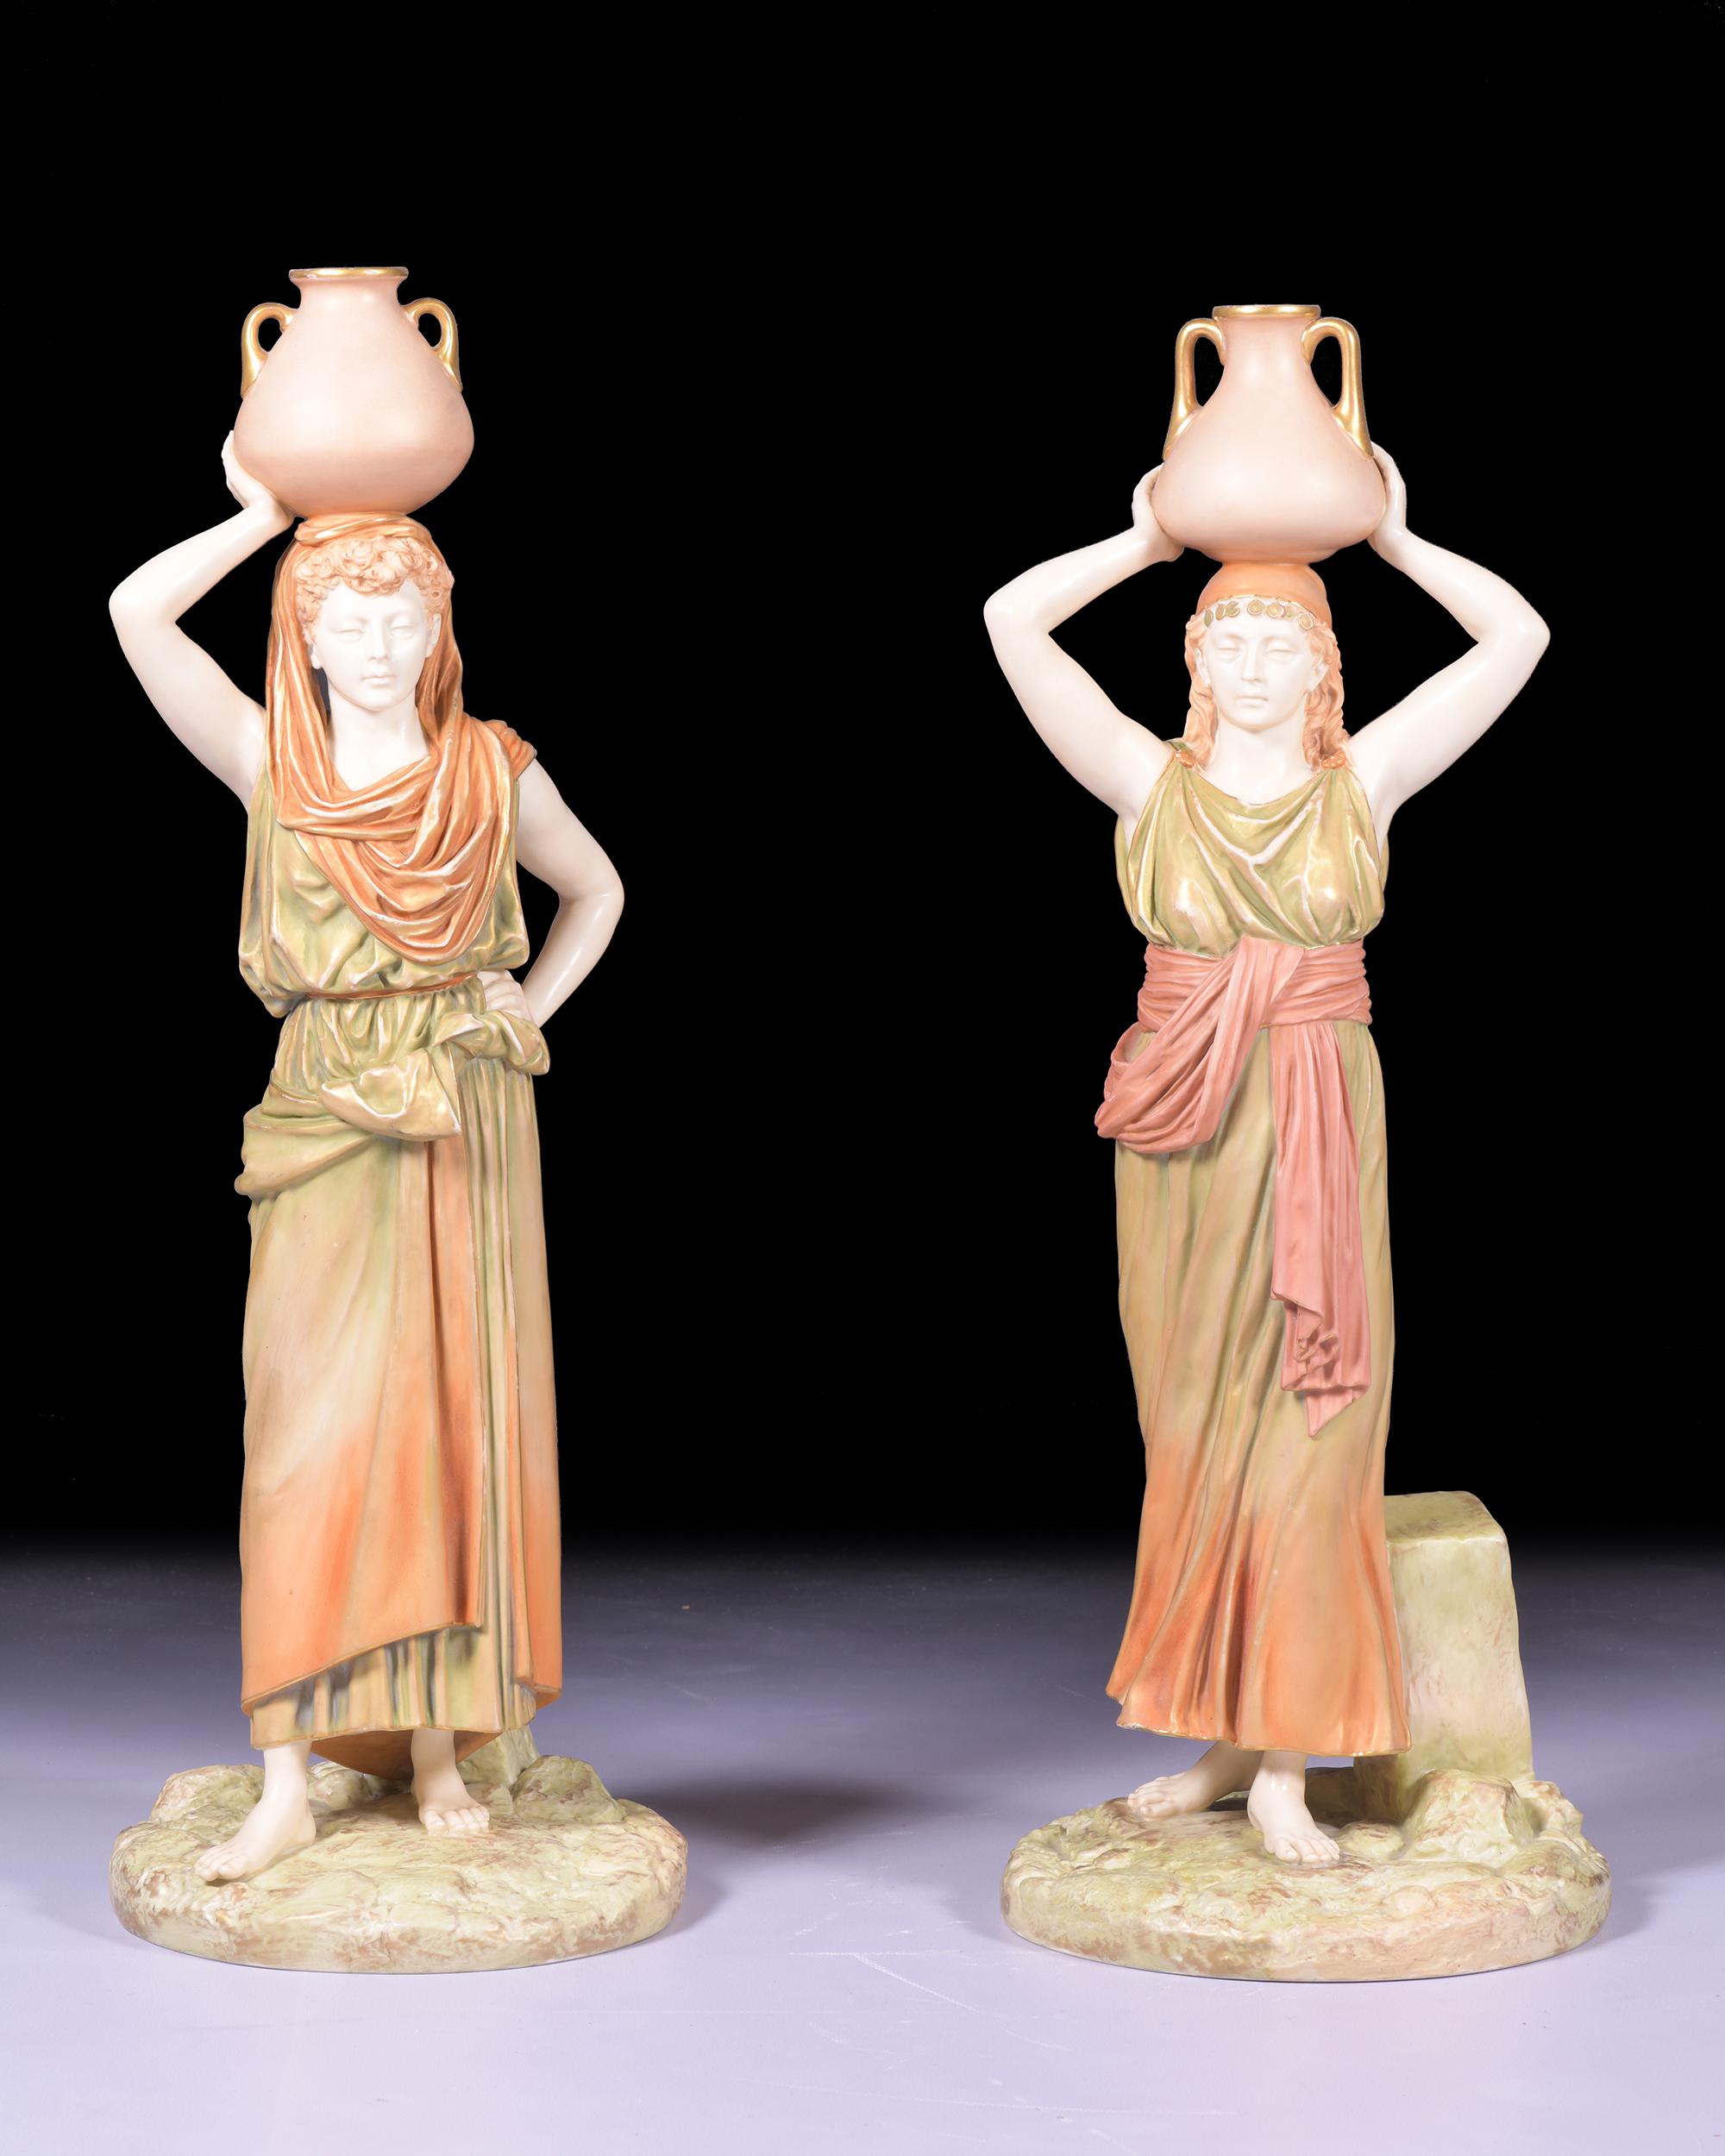 Modelled by James Hadley as women holding water vessels upon their heads, wearing long robes coloured in 'patent metallic' colours in shades of orange and green, upon rocky mound bases inscribed Hadley to the reverse, printed patent marks and shape